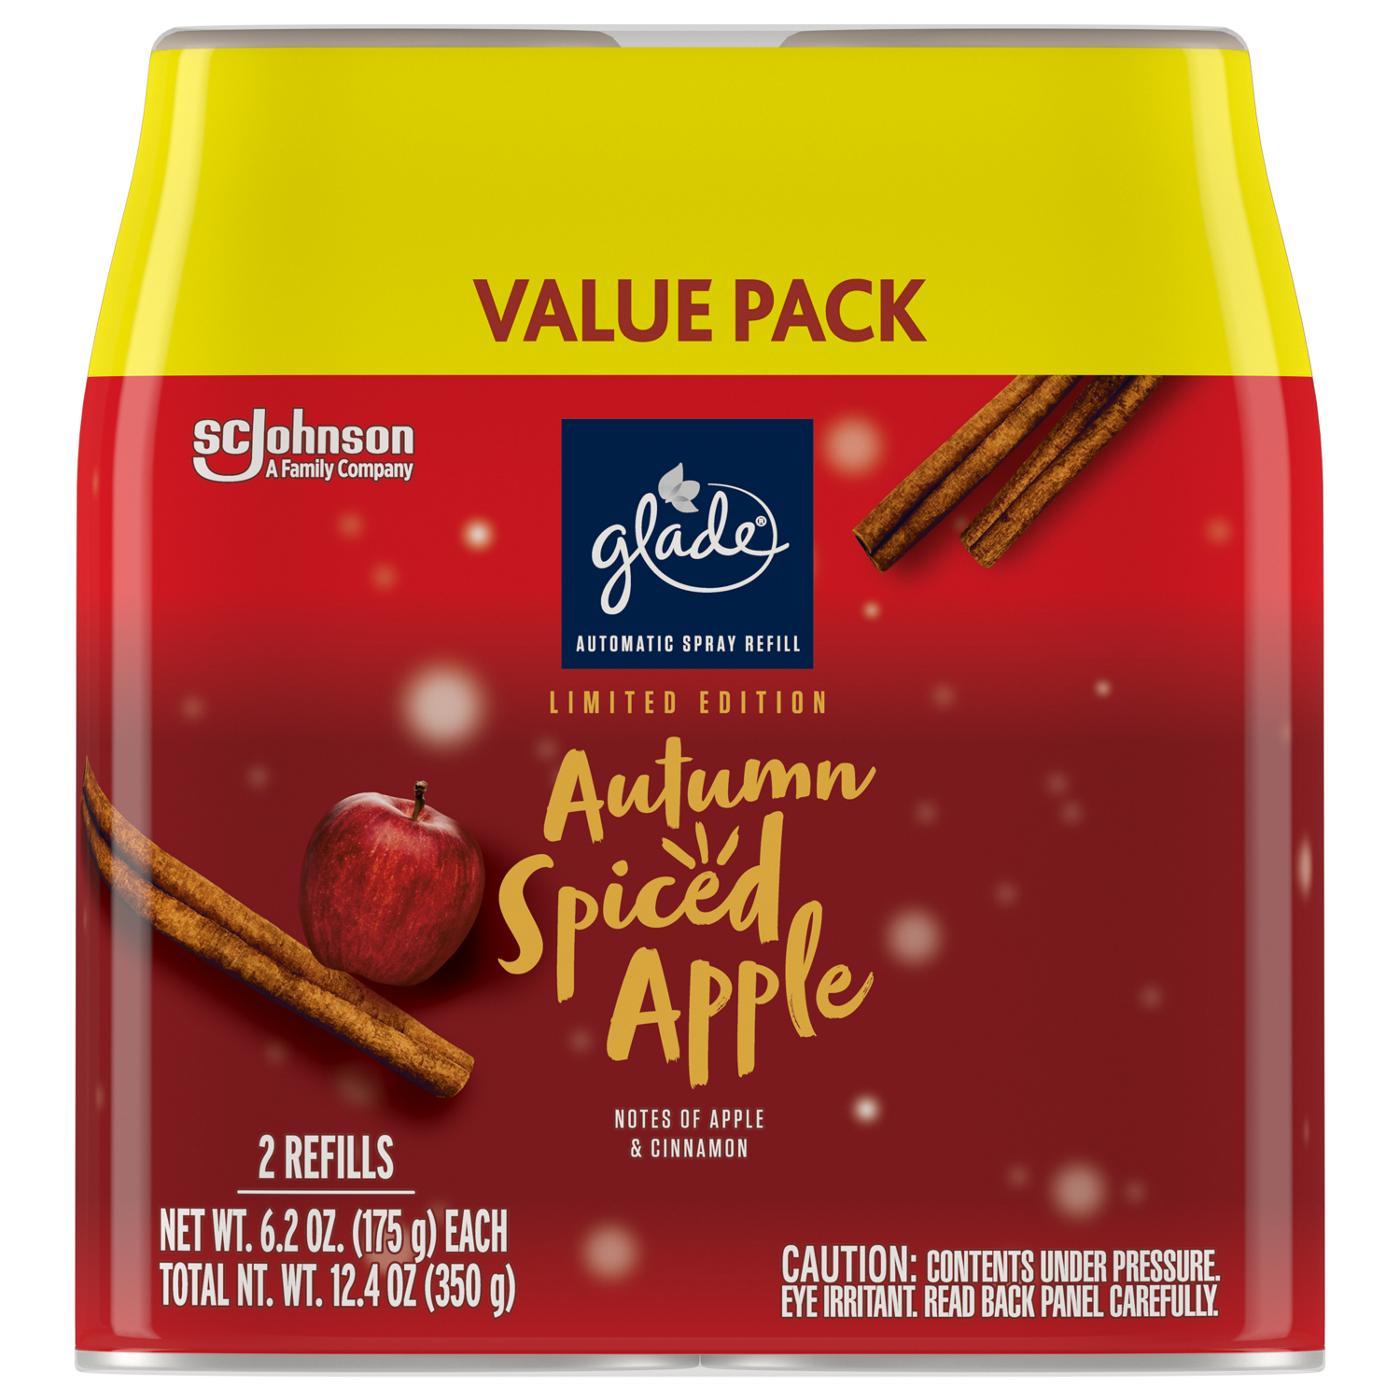 Glade Automatic Spray Refill, Value Pack - Autumn Spiced Apple; image 3 of 3